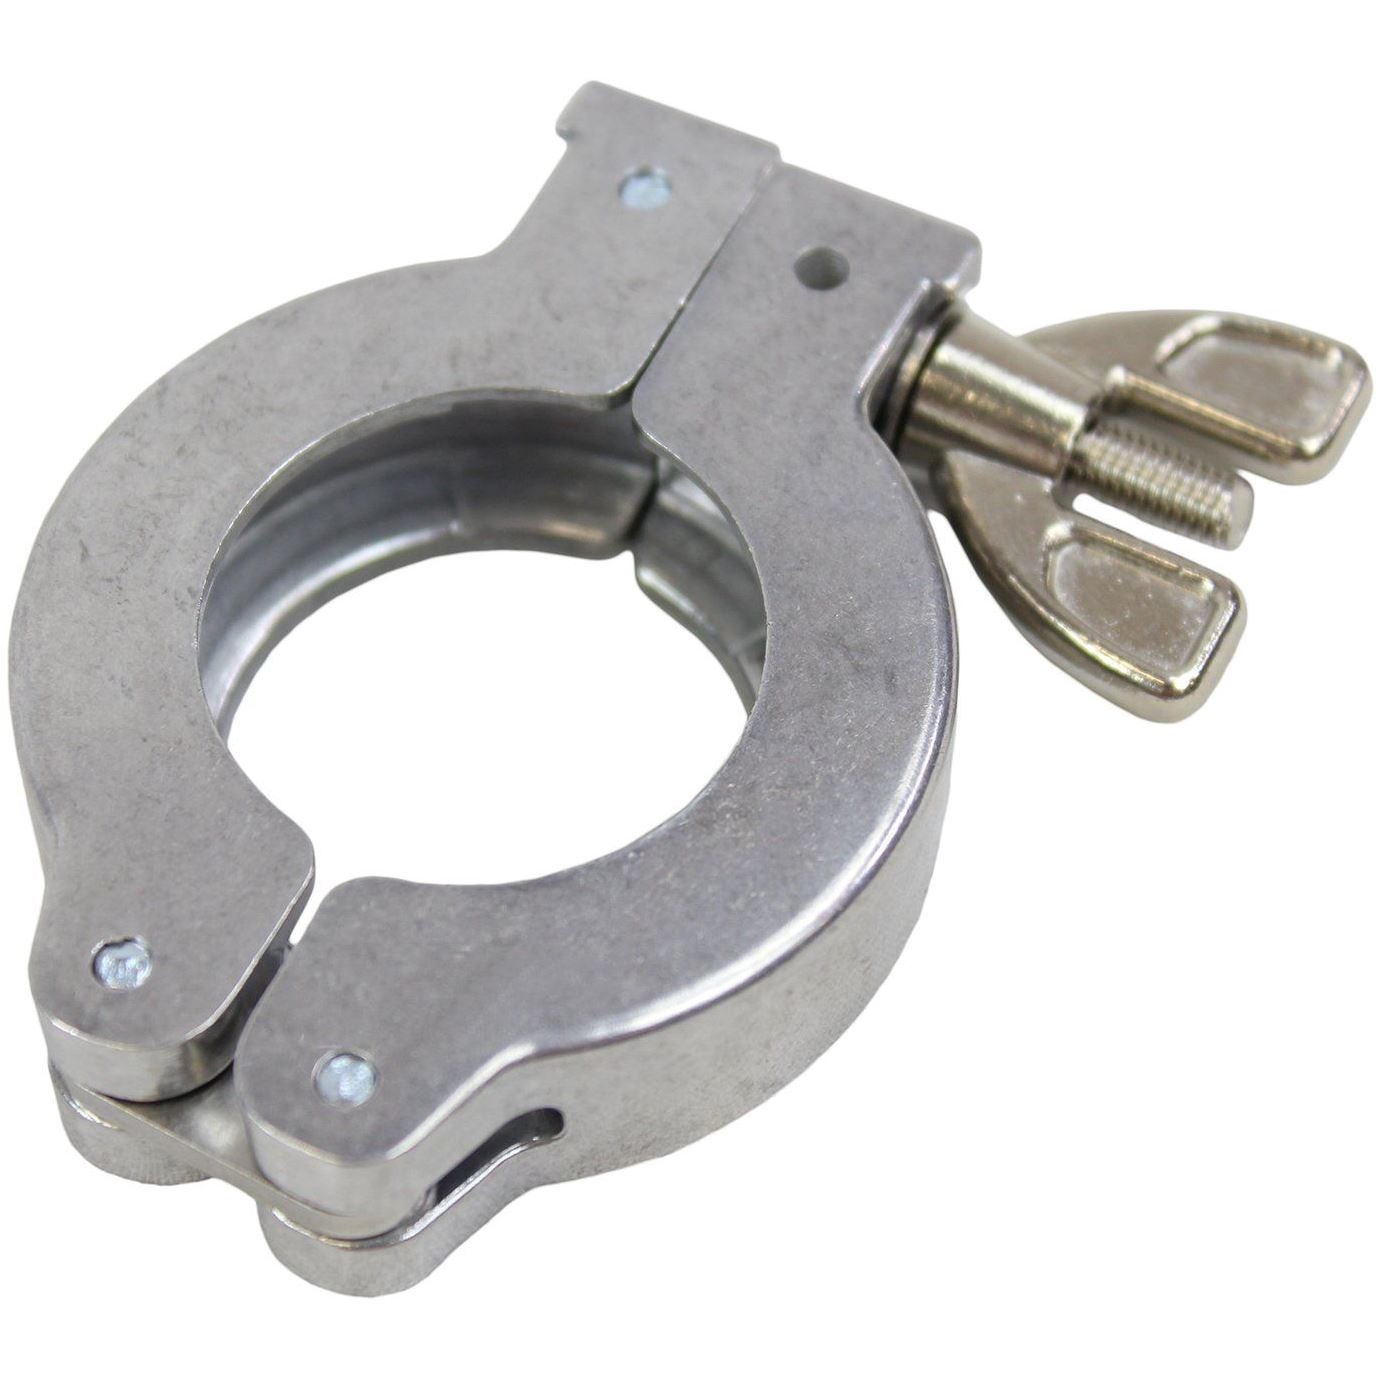 KF Clamps Shop All Categories BVV KF-25 